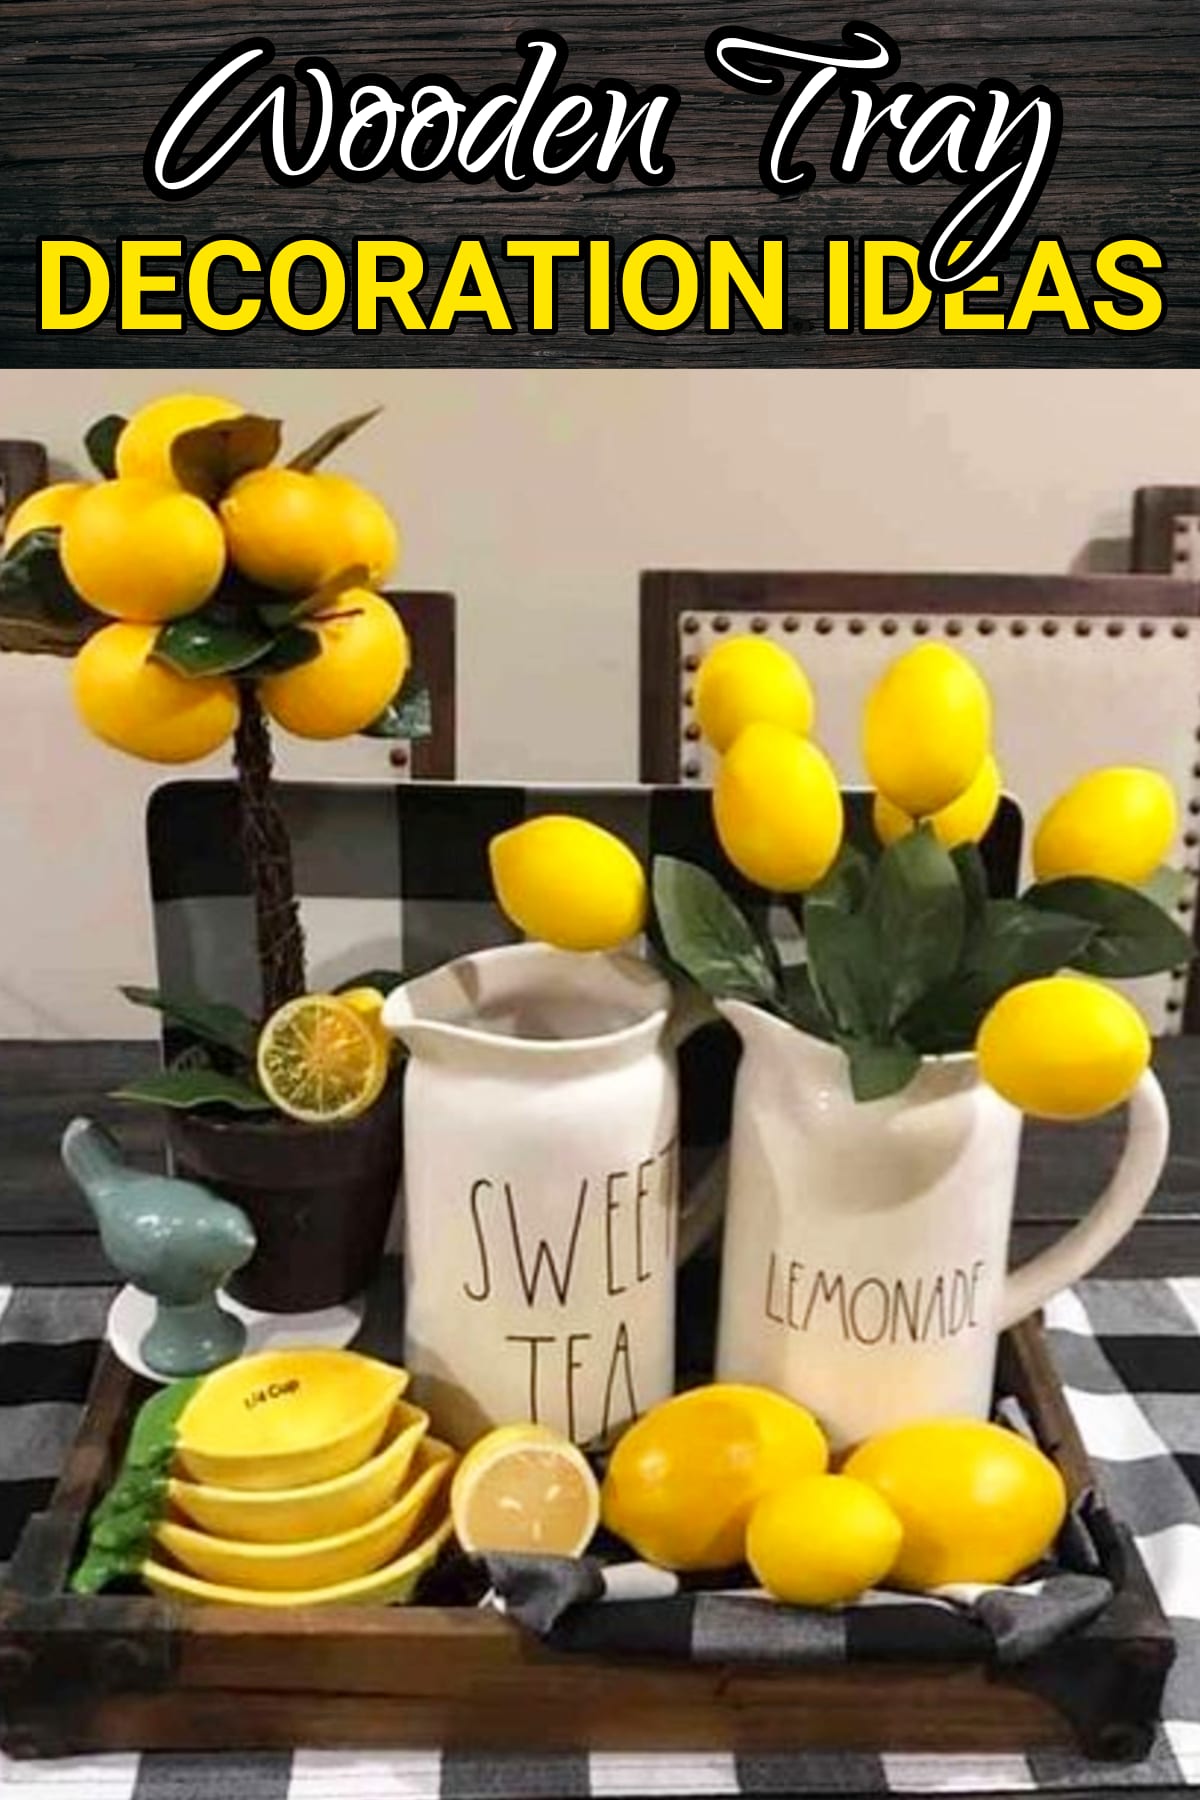 wooden tray decoration ideas with lemons, Rae Dunn items and black and white plaid accents